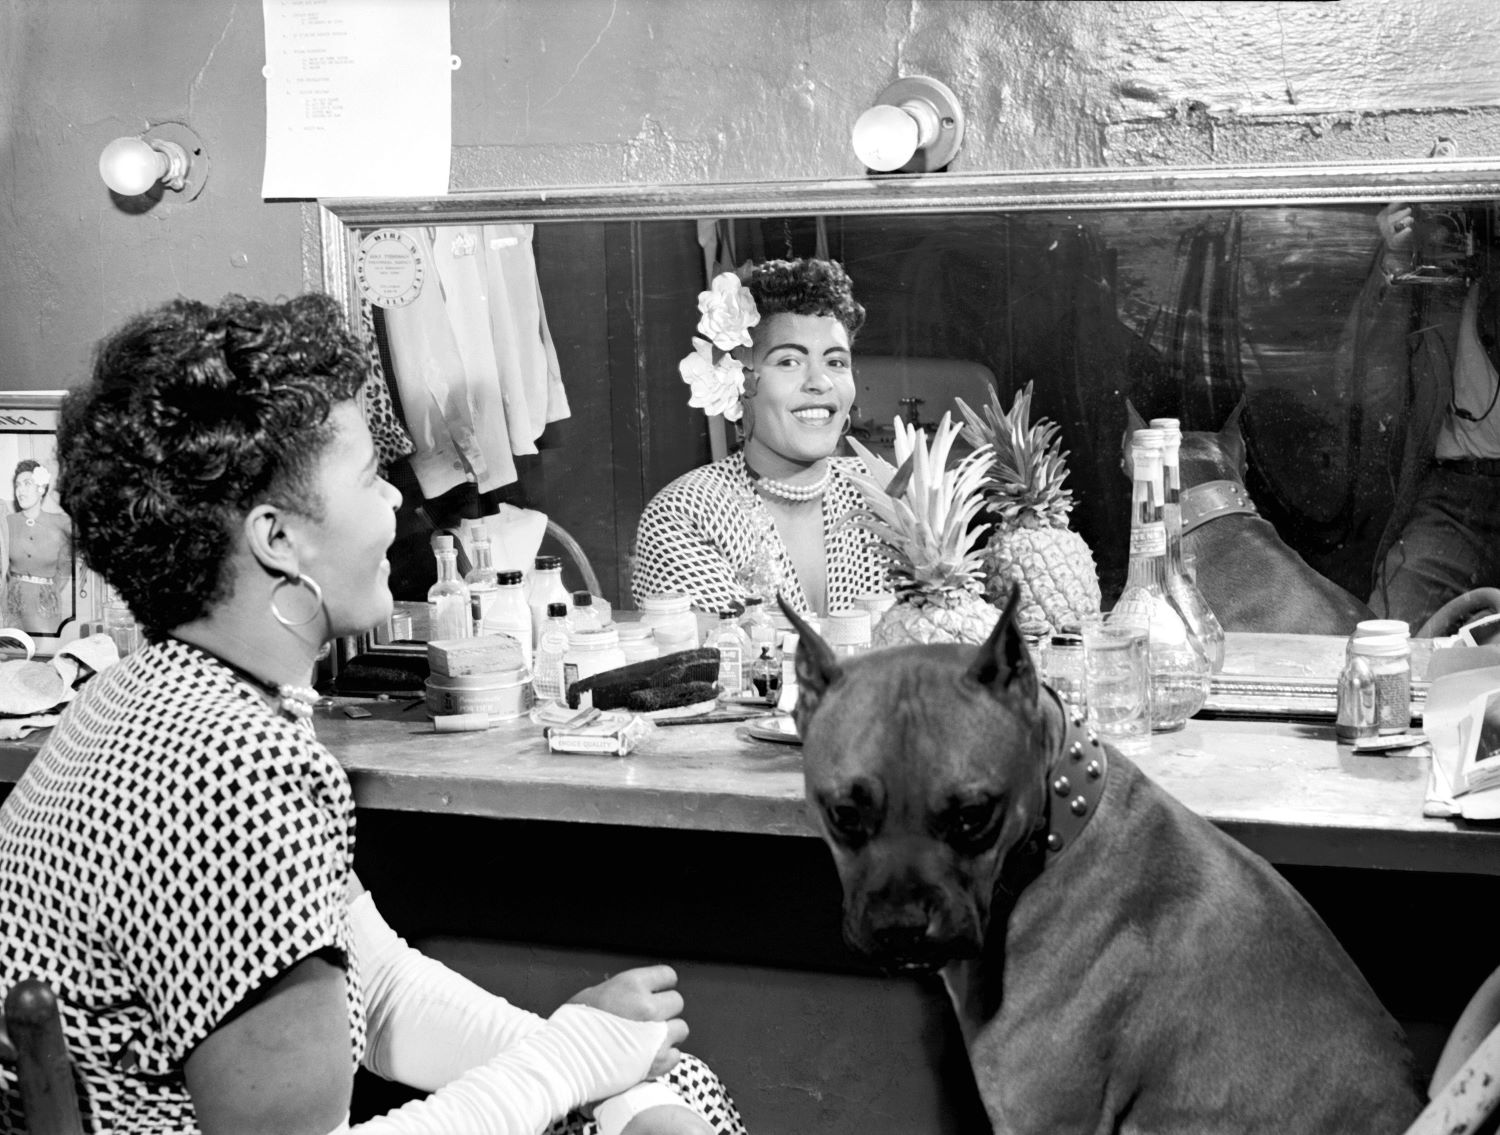 Billie Holiday and her boxer dog